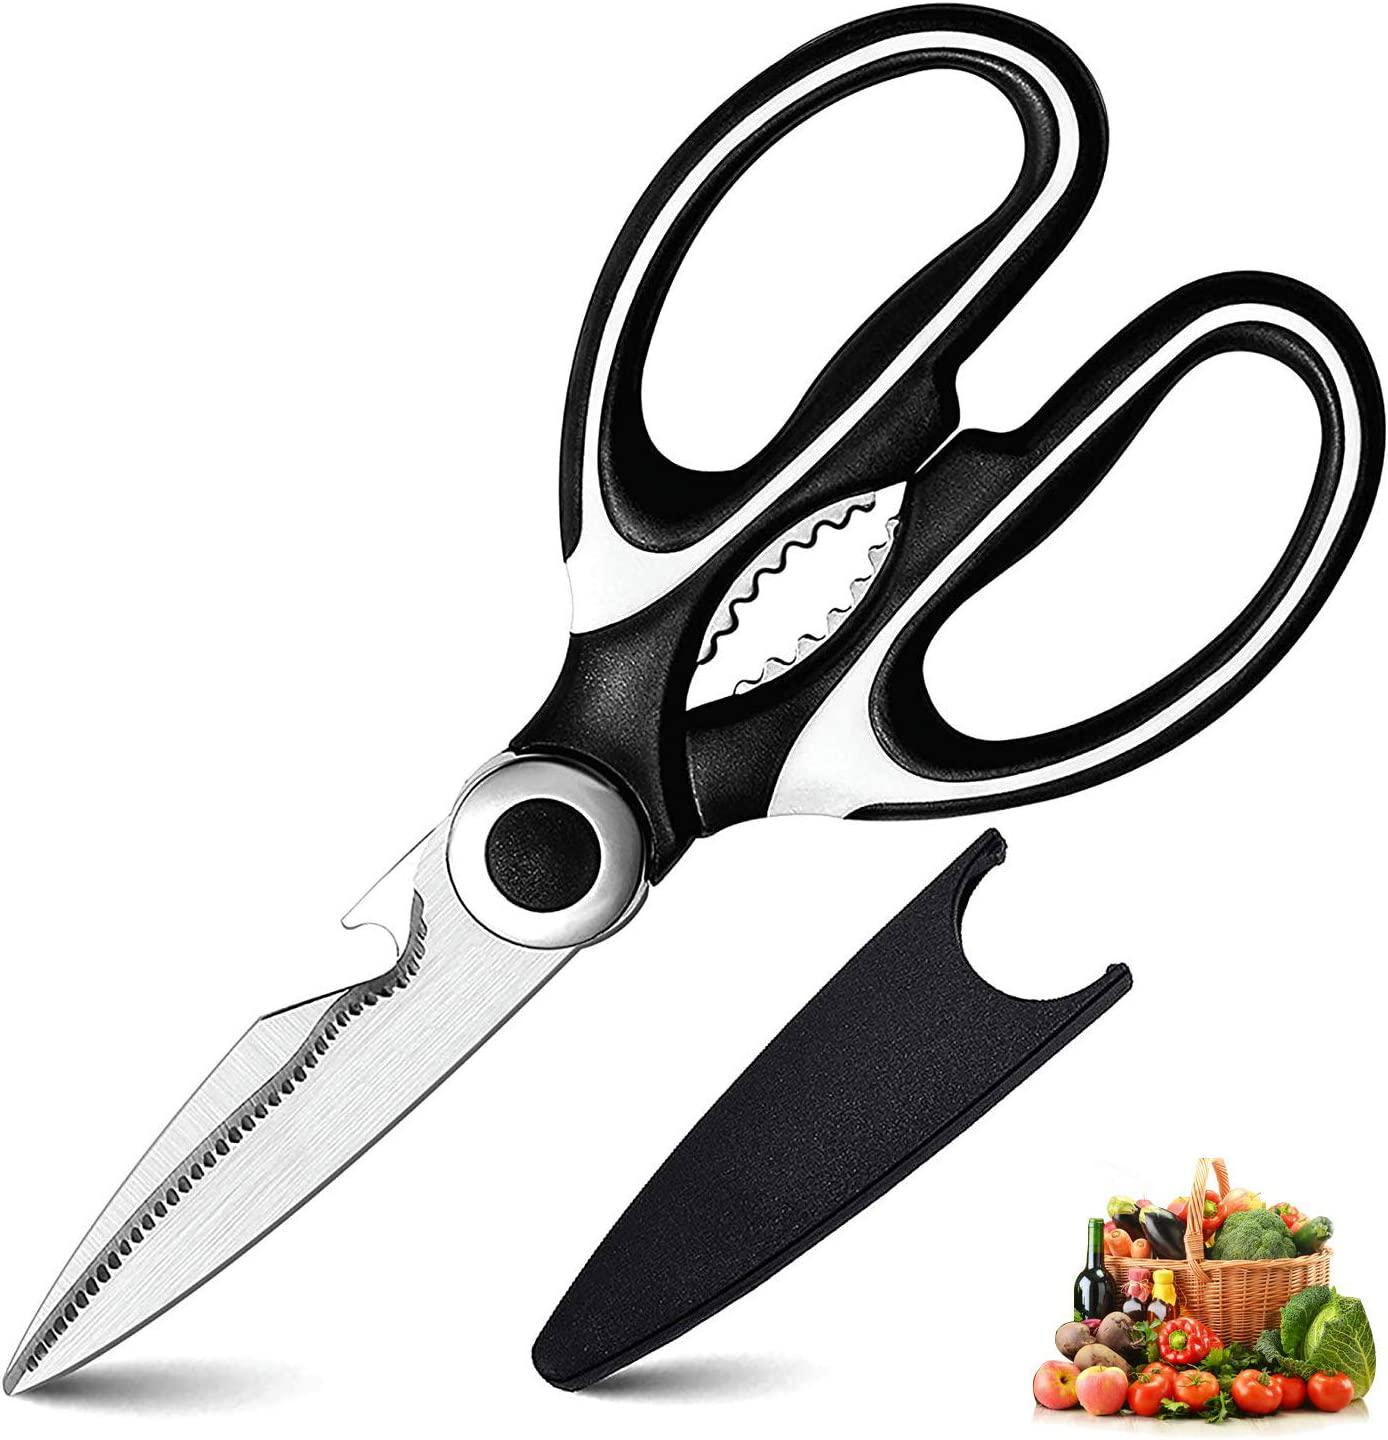 AiScrofa, Kitchen Shears,Multifunctional Heavy Duty Kitchen Scissors - Ultra Sharp Stainless Steel Shears for Chicken, Poultry, Meat,Fish, Vegetables and BBQ(Black and White)